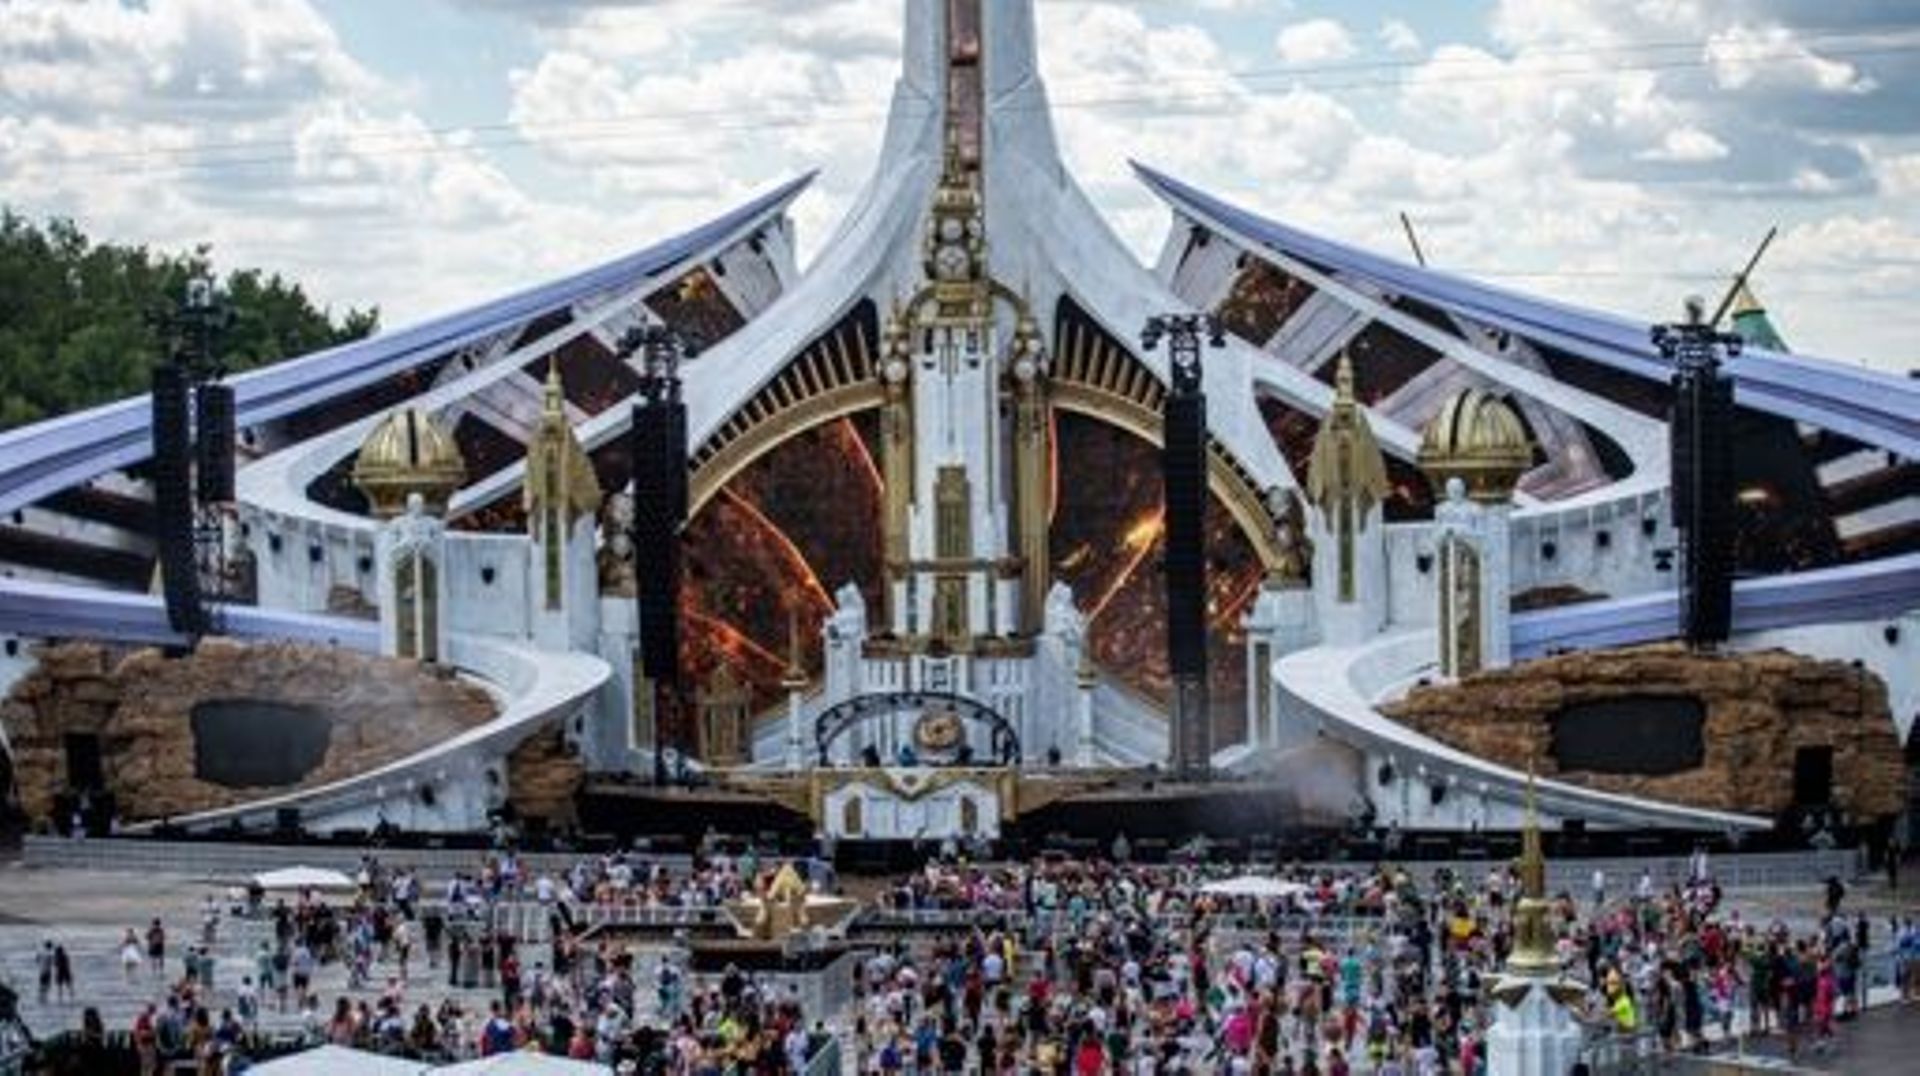 Illustration picture shows the mainstage during the first day of the Tomorrowland electronic music festival, Friday 15 July 2022, in Boom. The 16th edition of the festival takes place on three weekends at the 'De Schorre' terrain in Boom, from 15 to 17 Ju